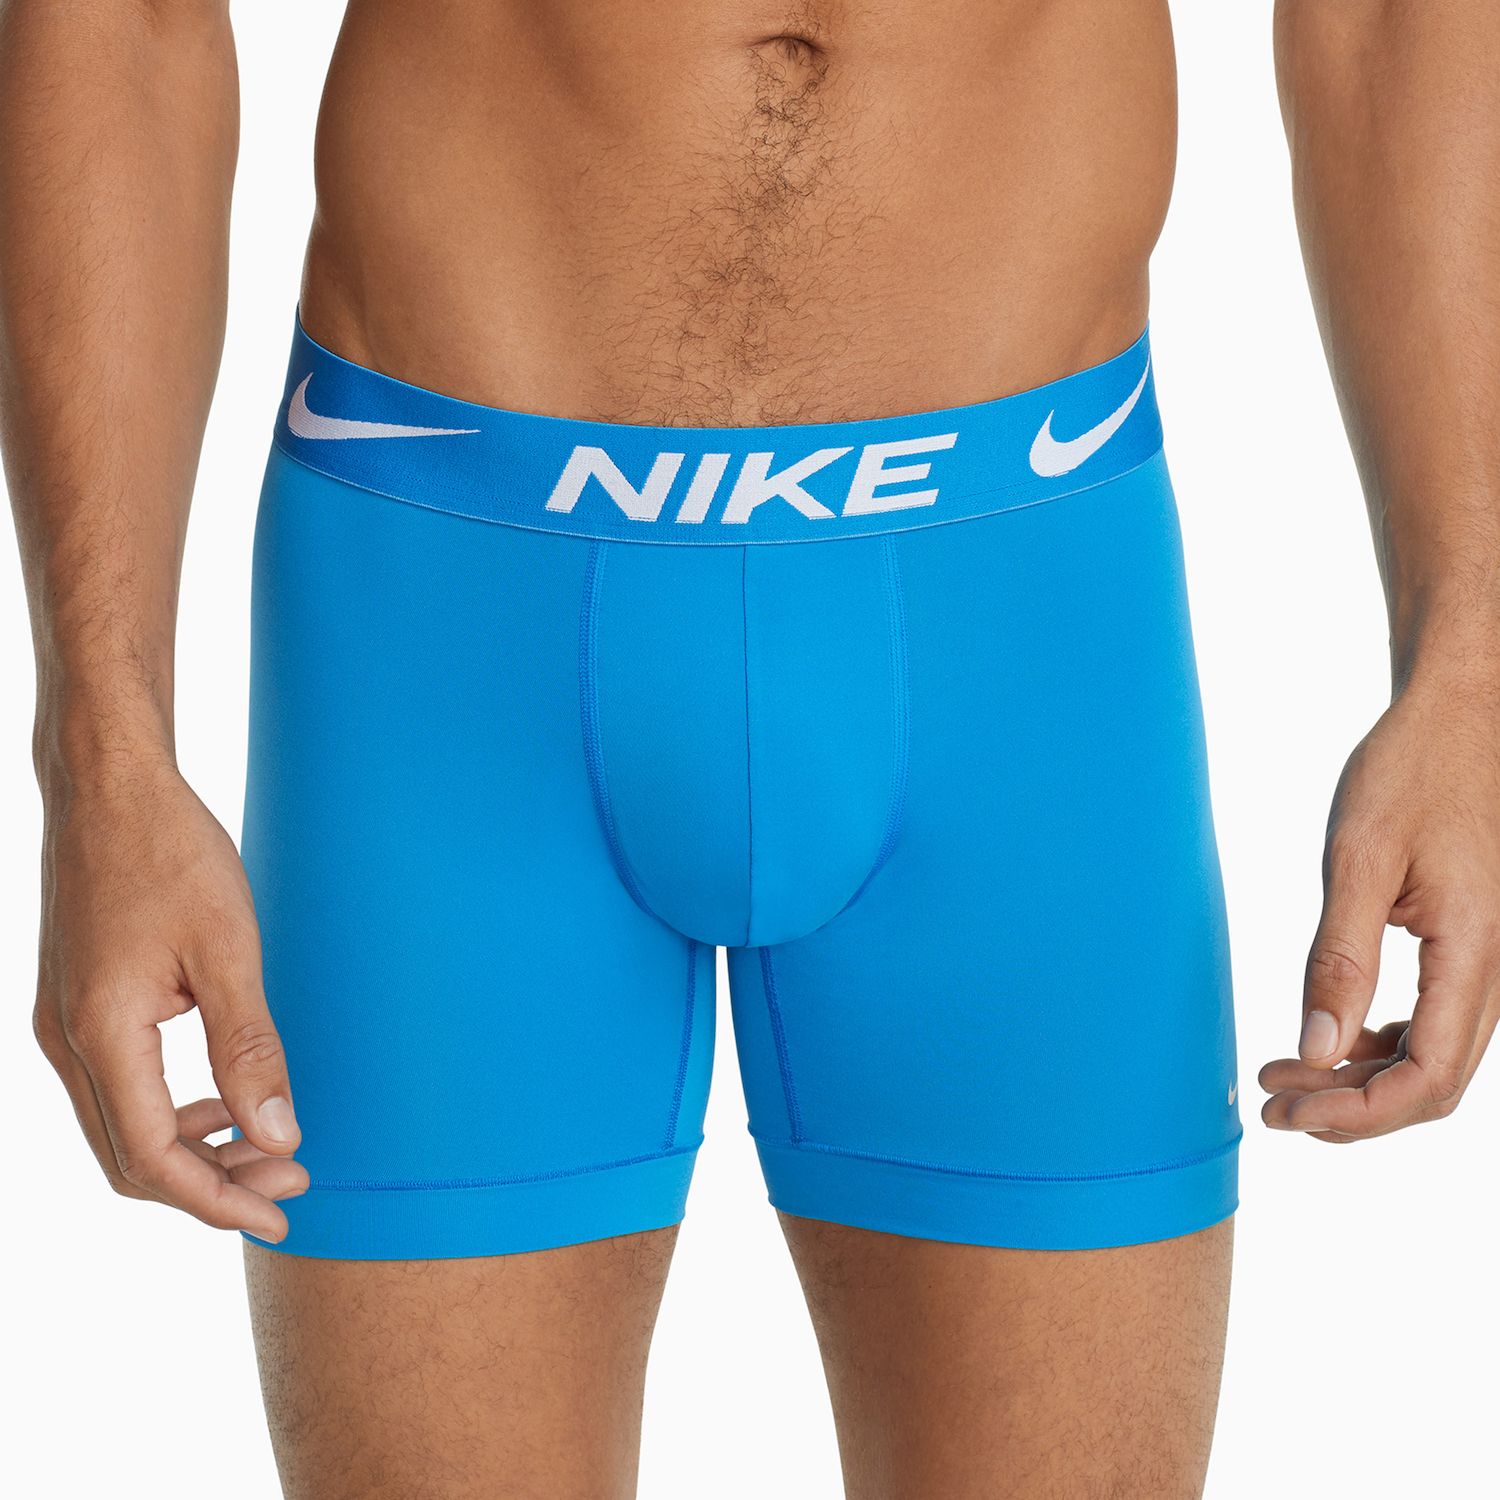 nike briefs mens,Save up to 18%,www.ilcascinone.com